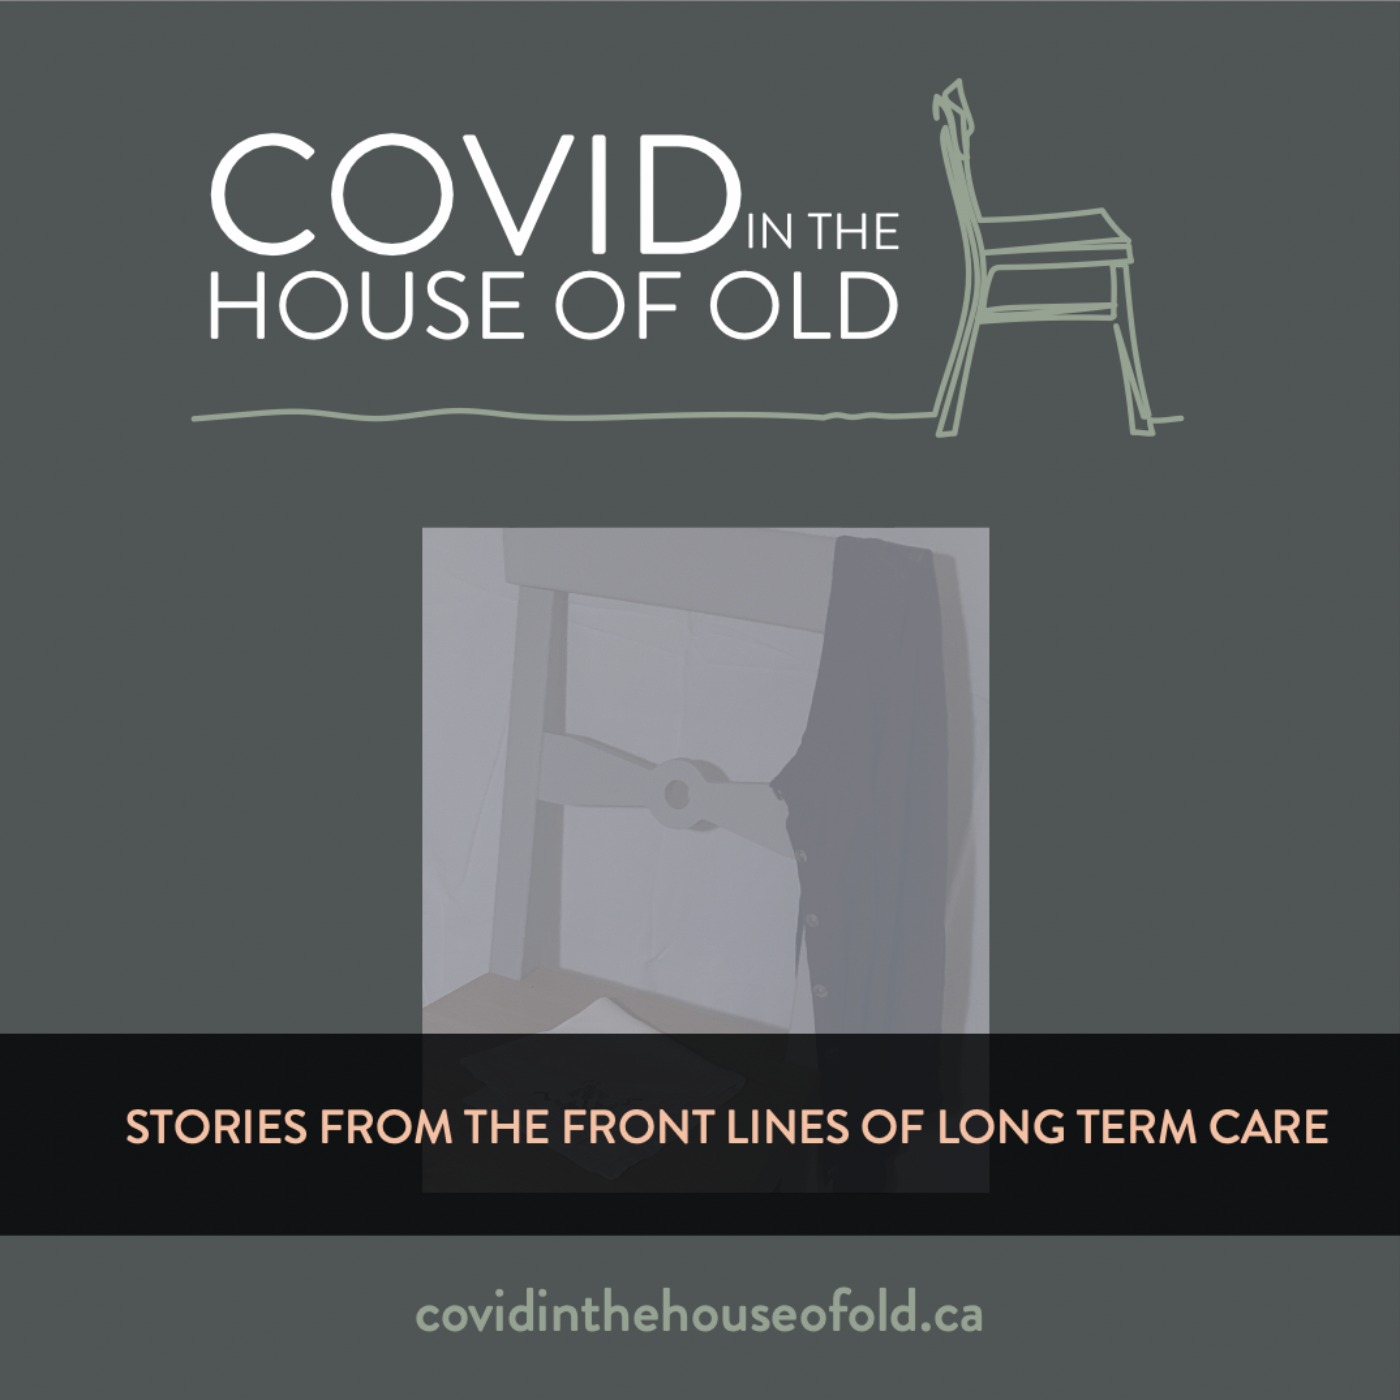 COVID in the House of Old Trailer